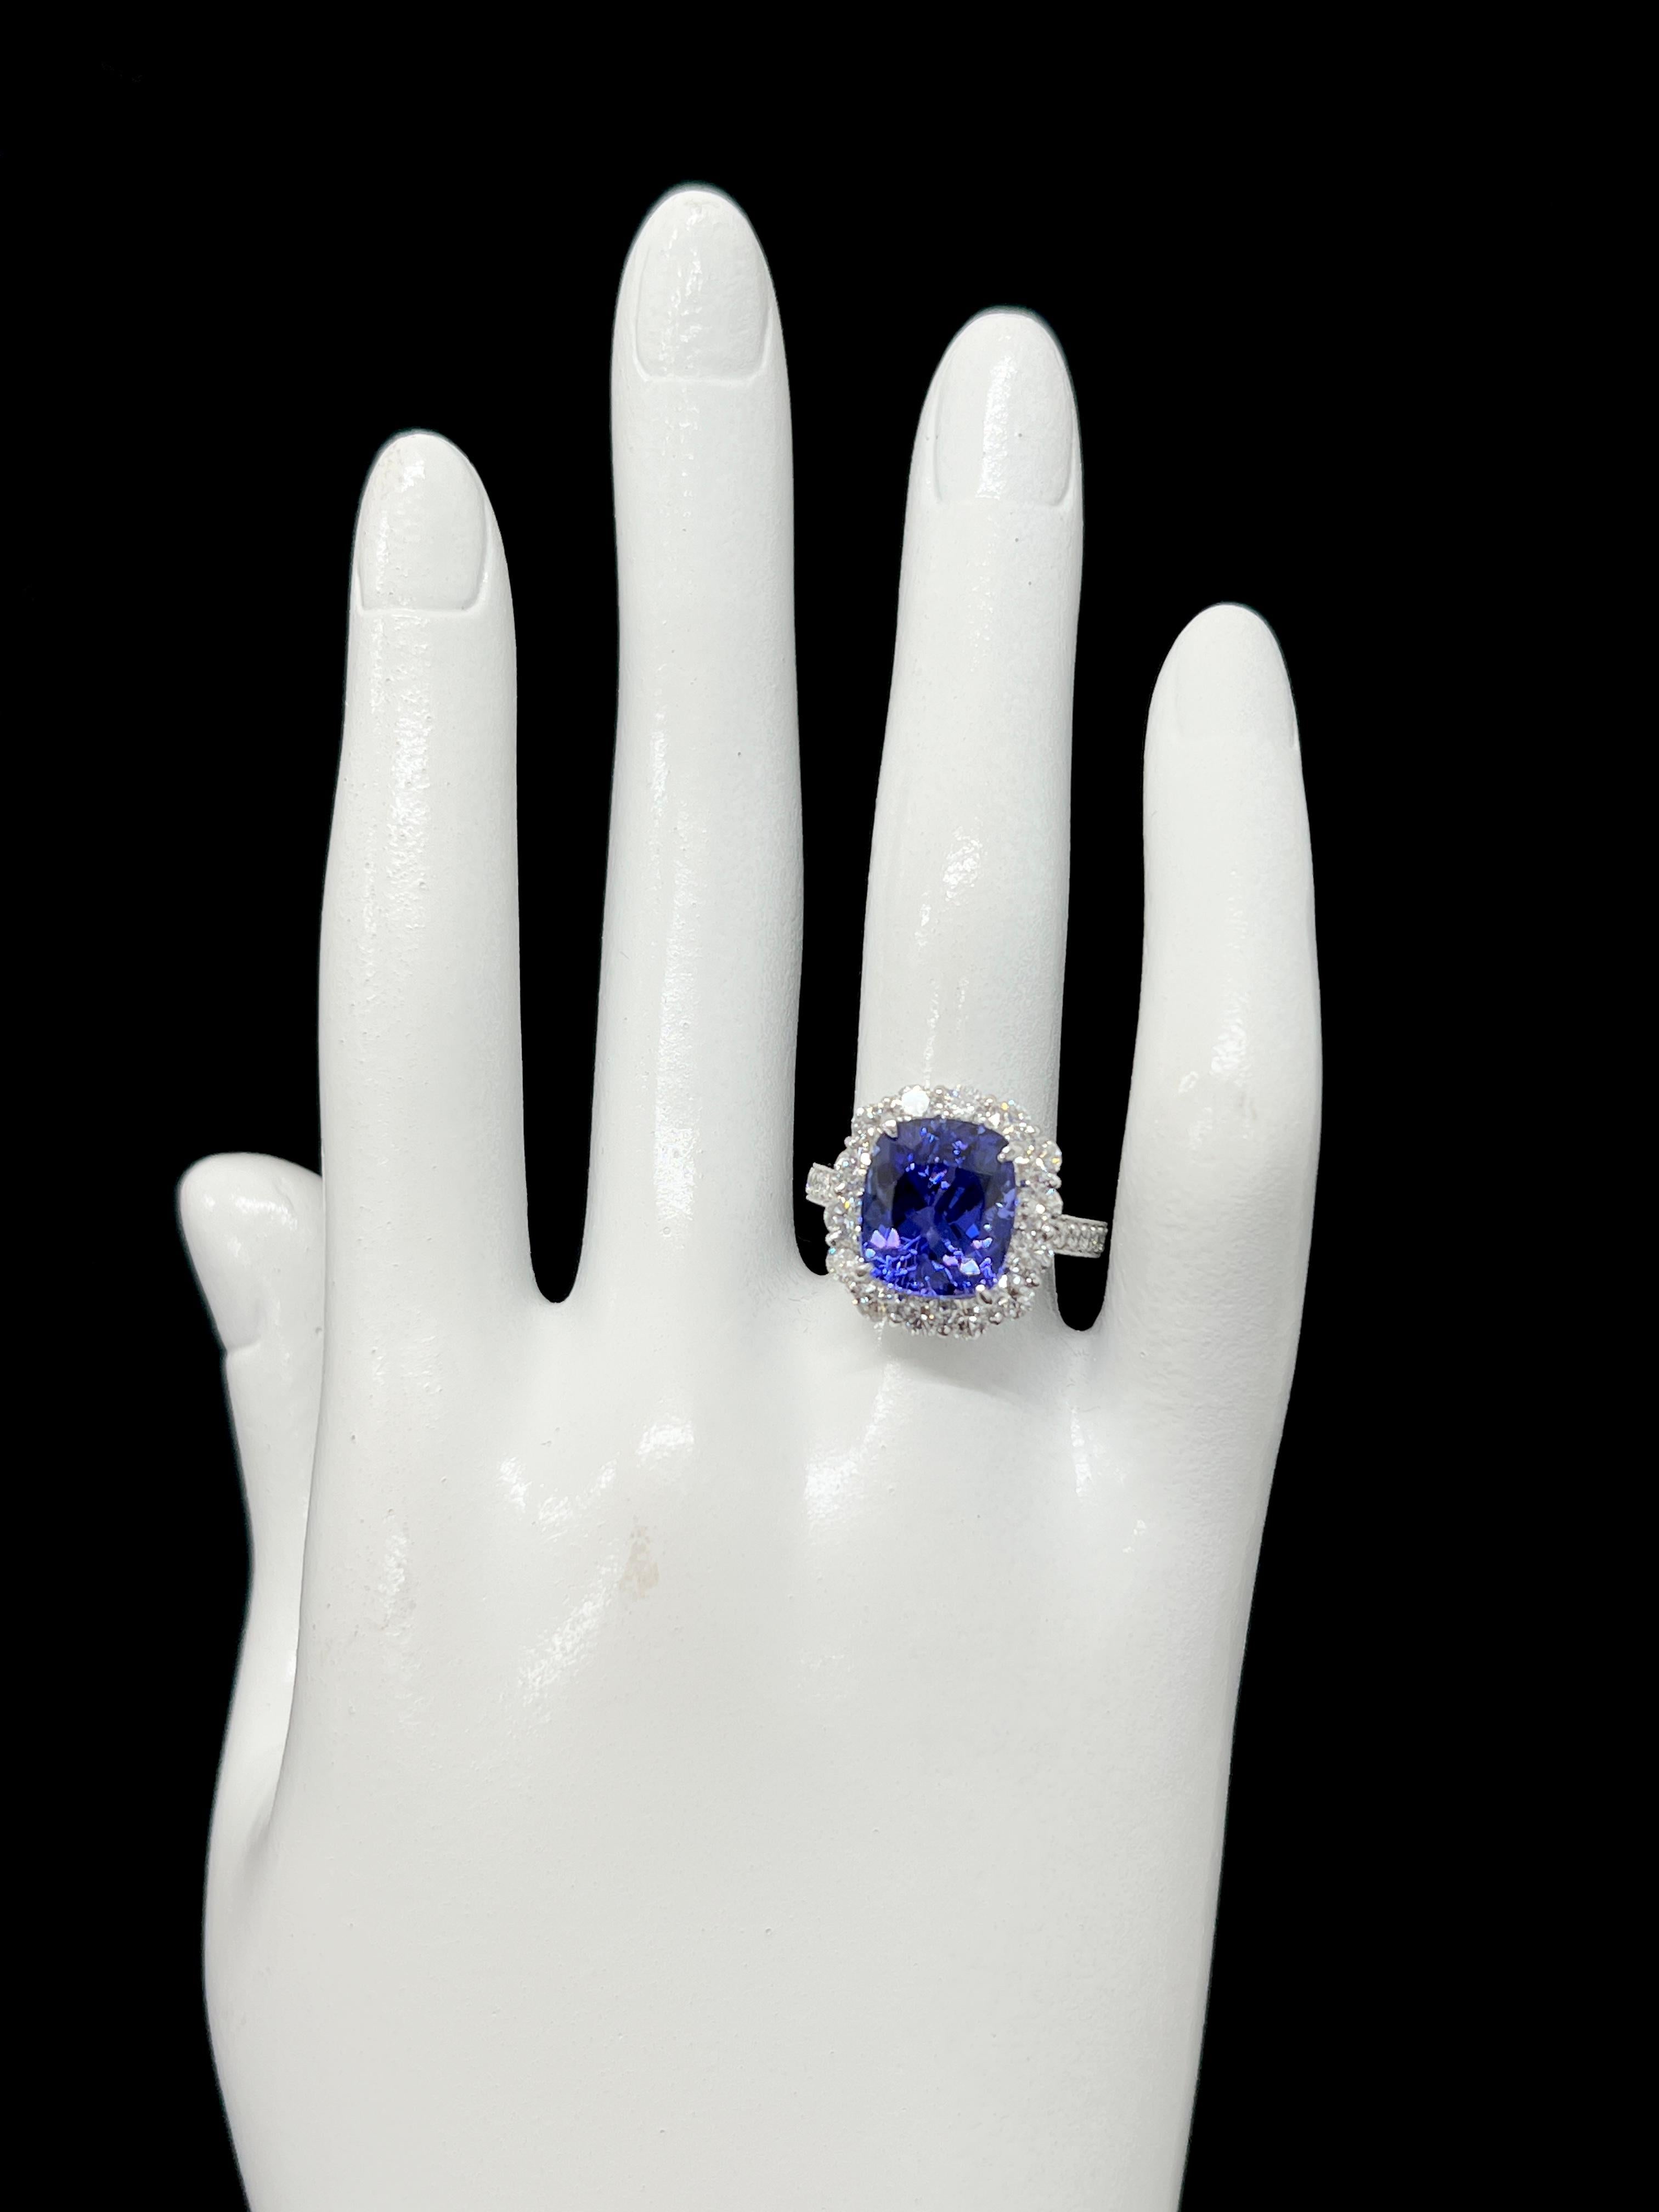 6.94 Carat Natural Cushion AAA+ Tanzanite and Diamond Ring Set in Platinum For Sale 1